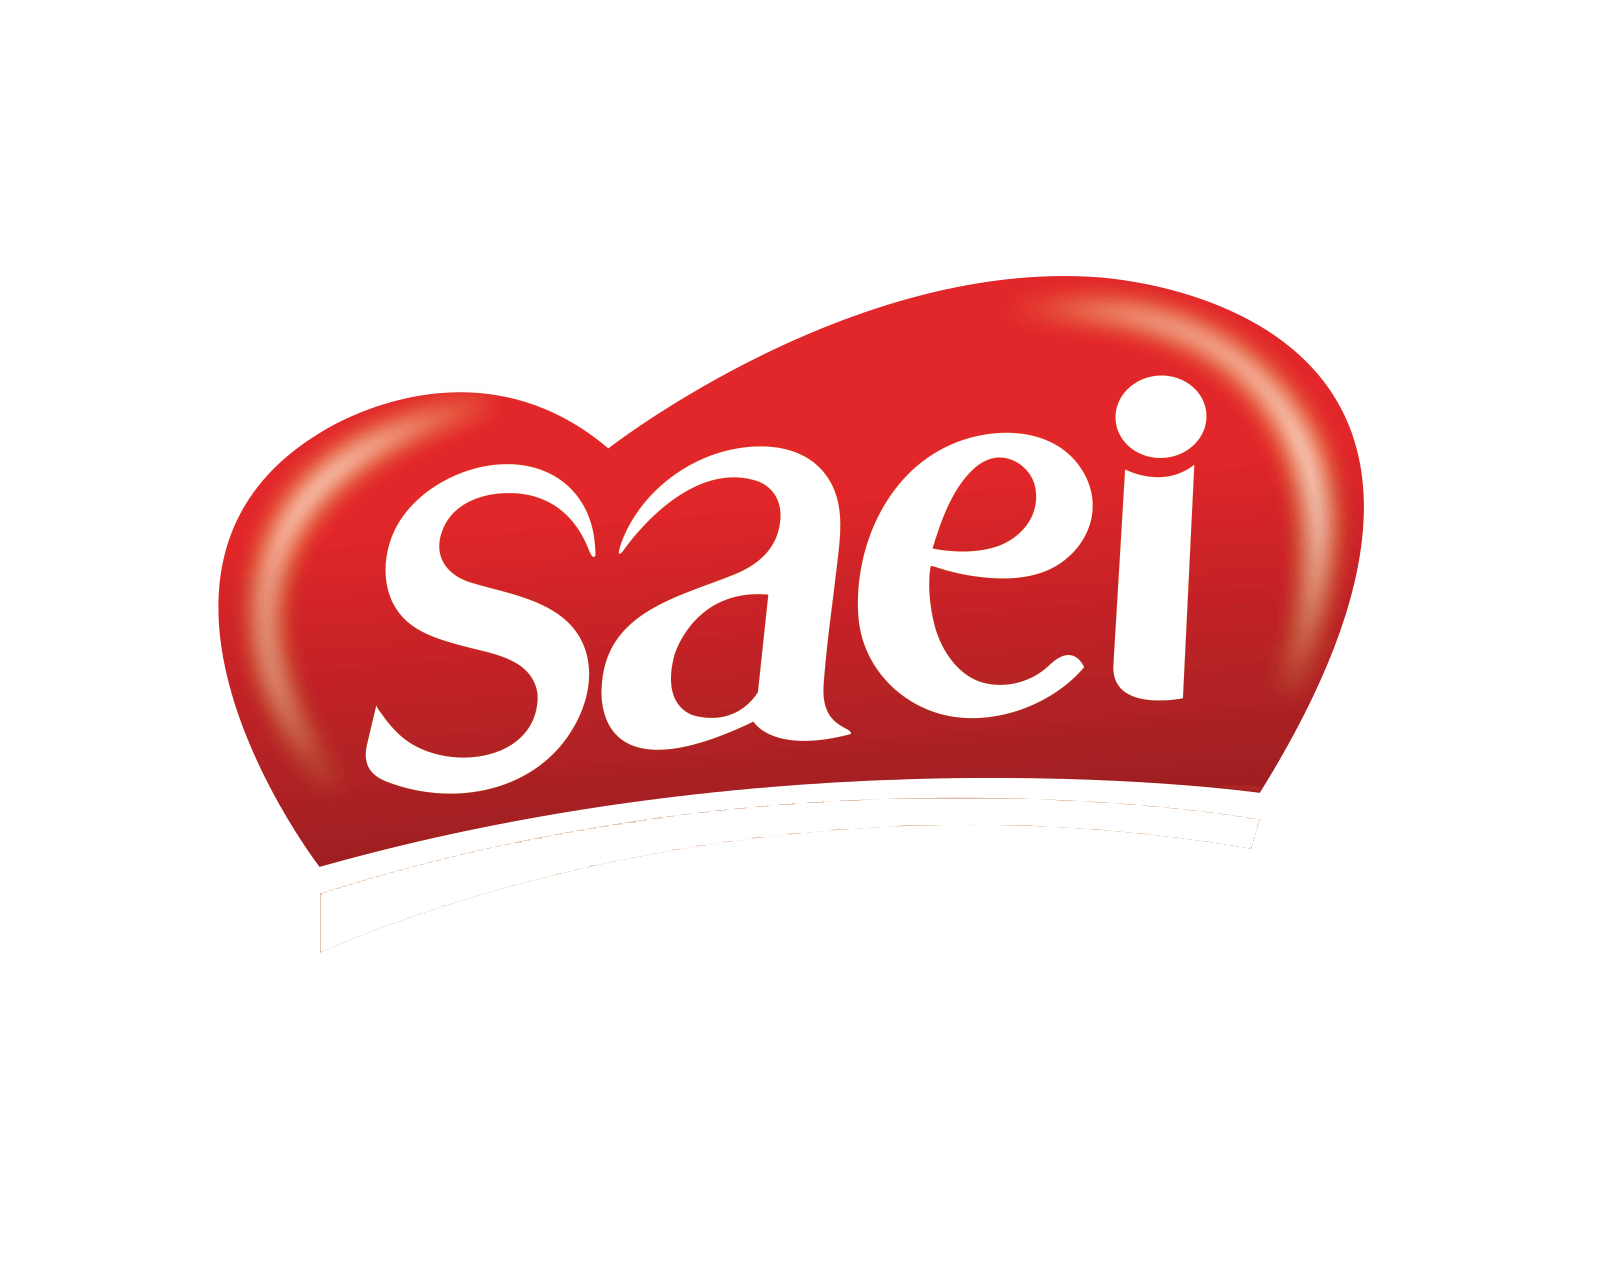 Saei | Be diligent in the path of change